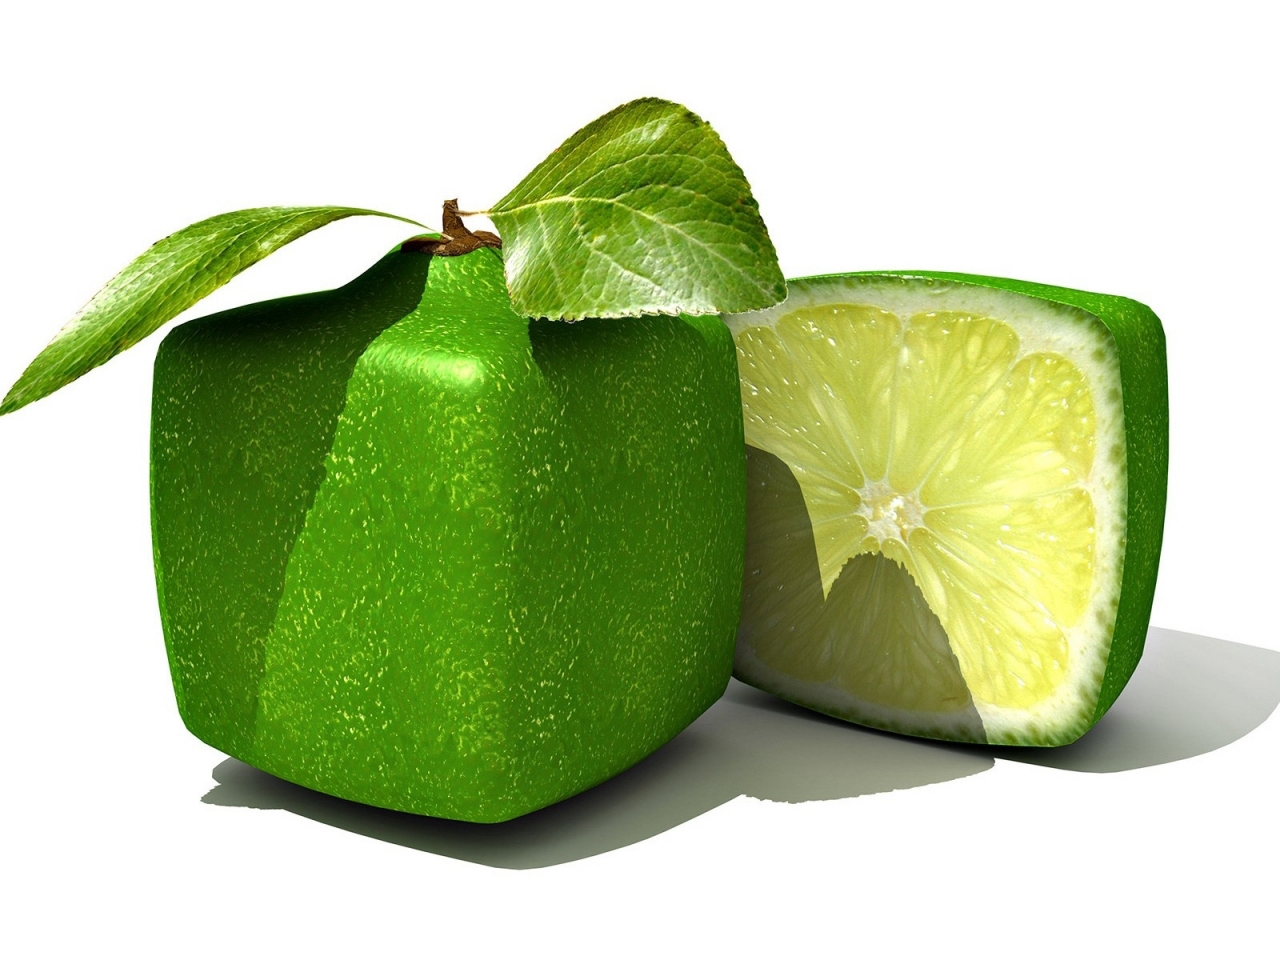 Square Limes for 1280 x 960 resolution